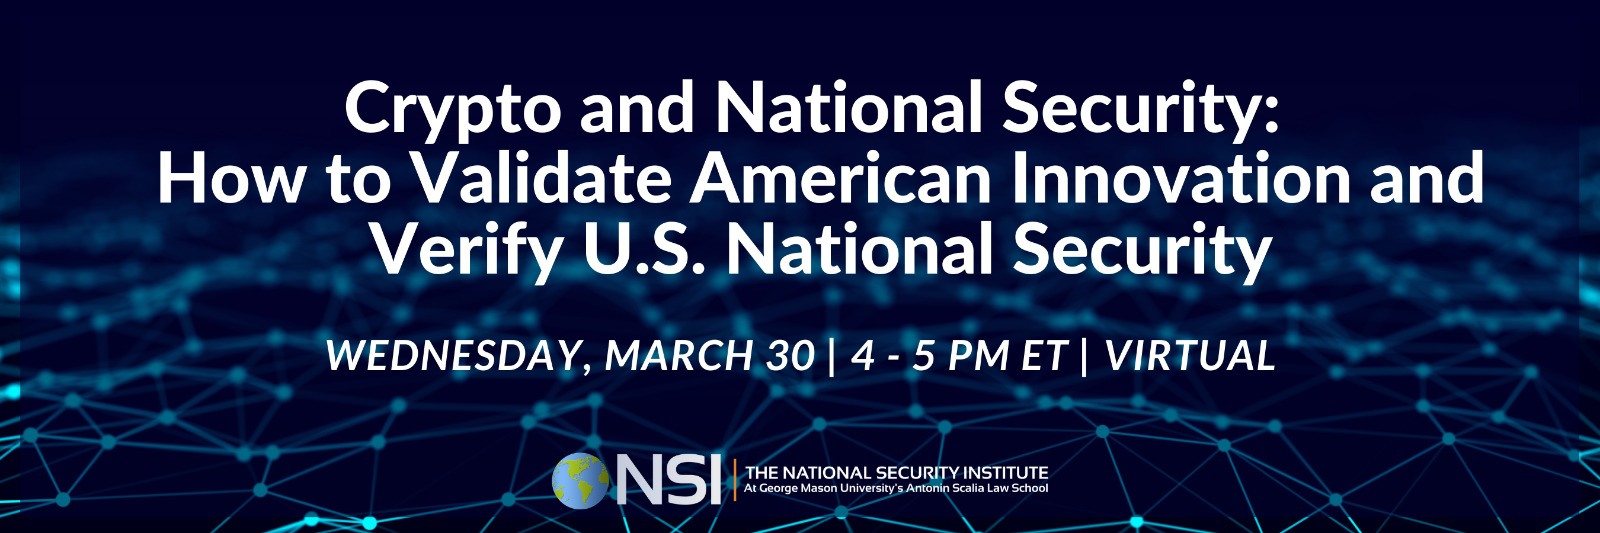 Crypto and National Security: How to Validate American Innovation and Verify U.S. National Security